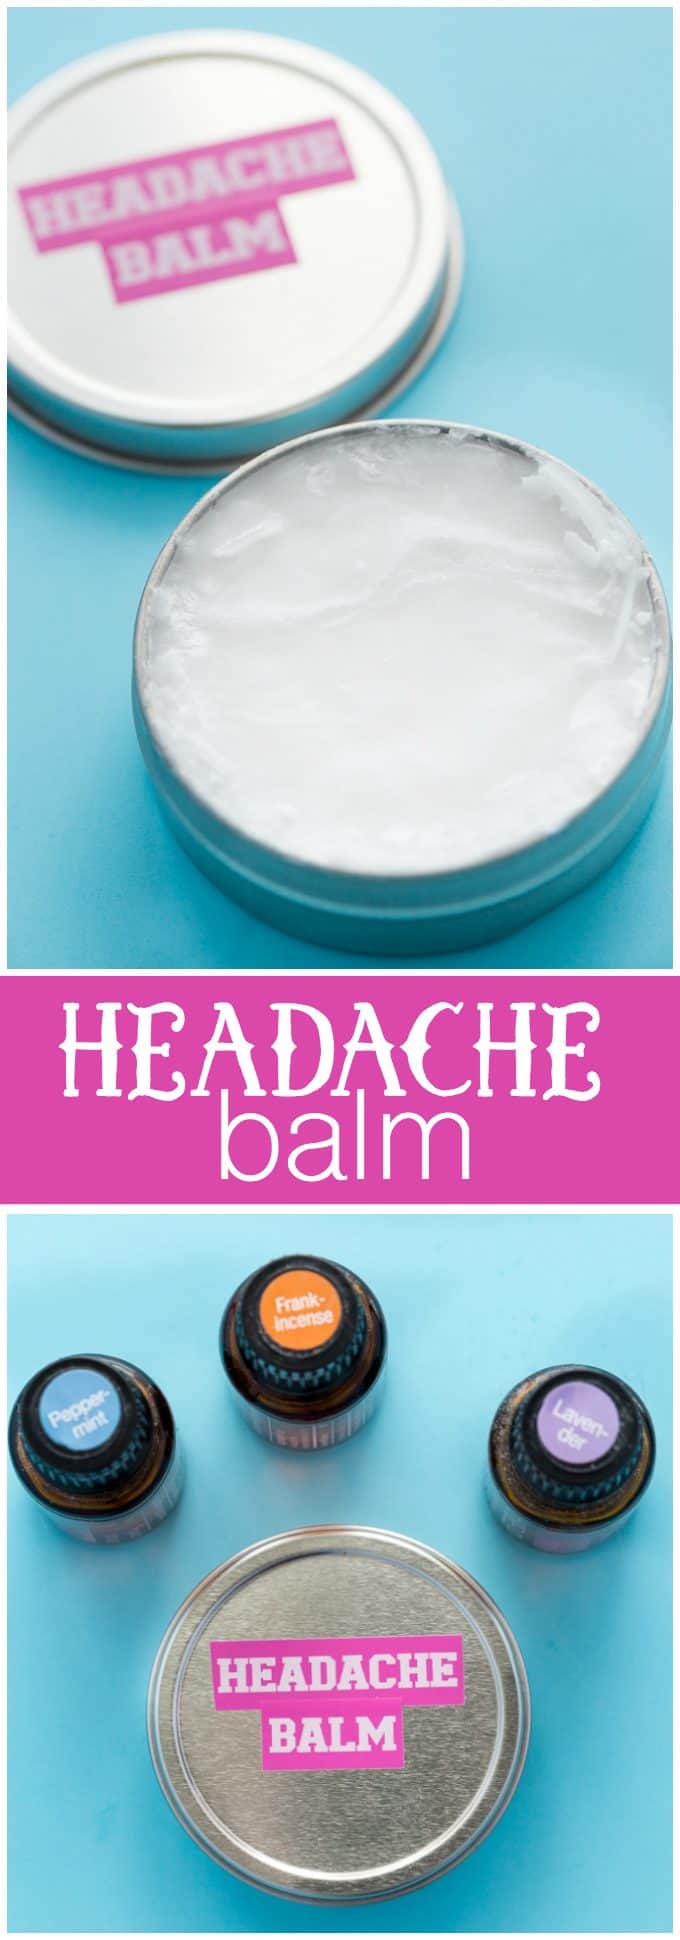 Headache Balm - Help soothe a headache with this simple DIY made with coconut oil, peppermint, lavender and frankincense essential oils.